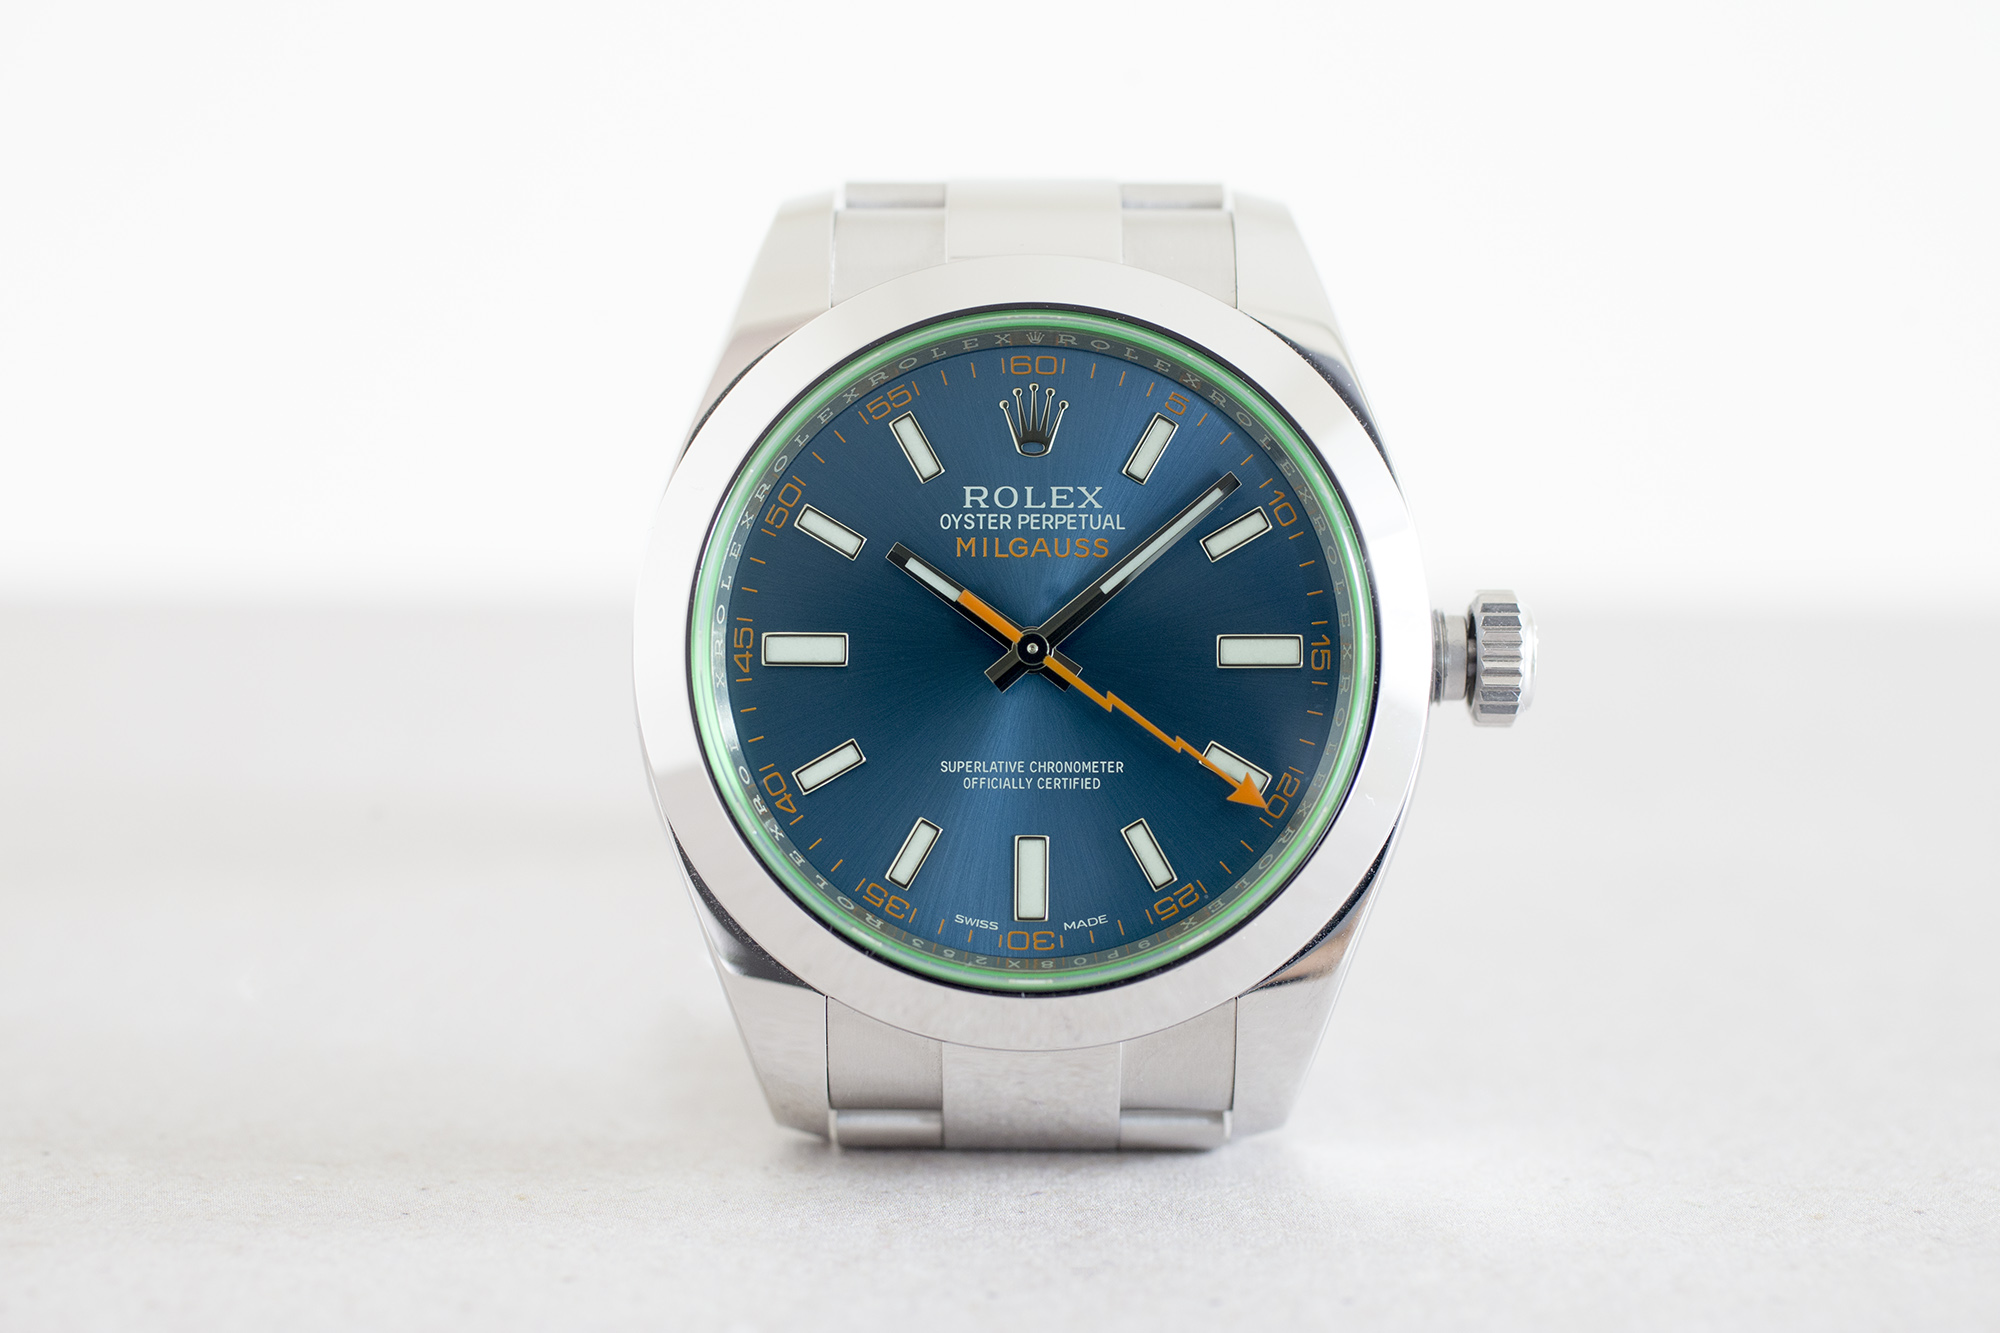 rolex oyster perpetual milgauss price